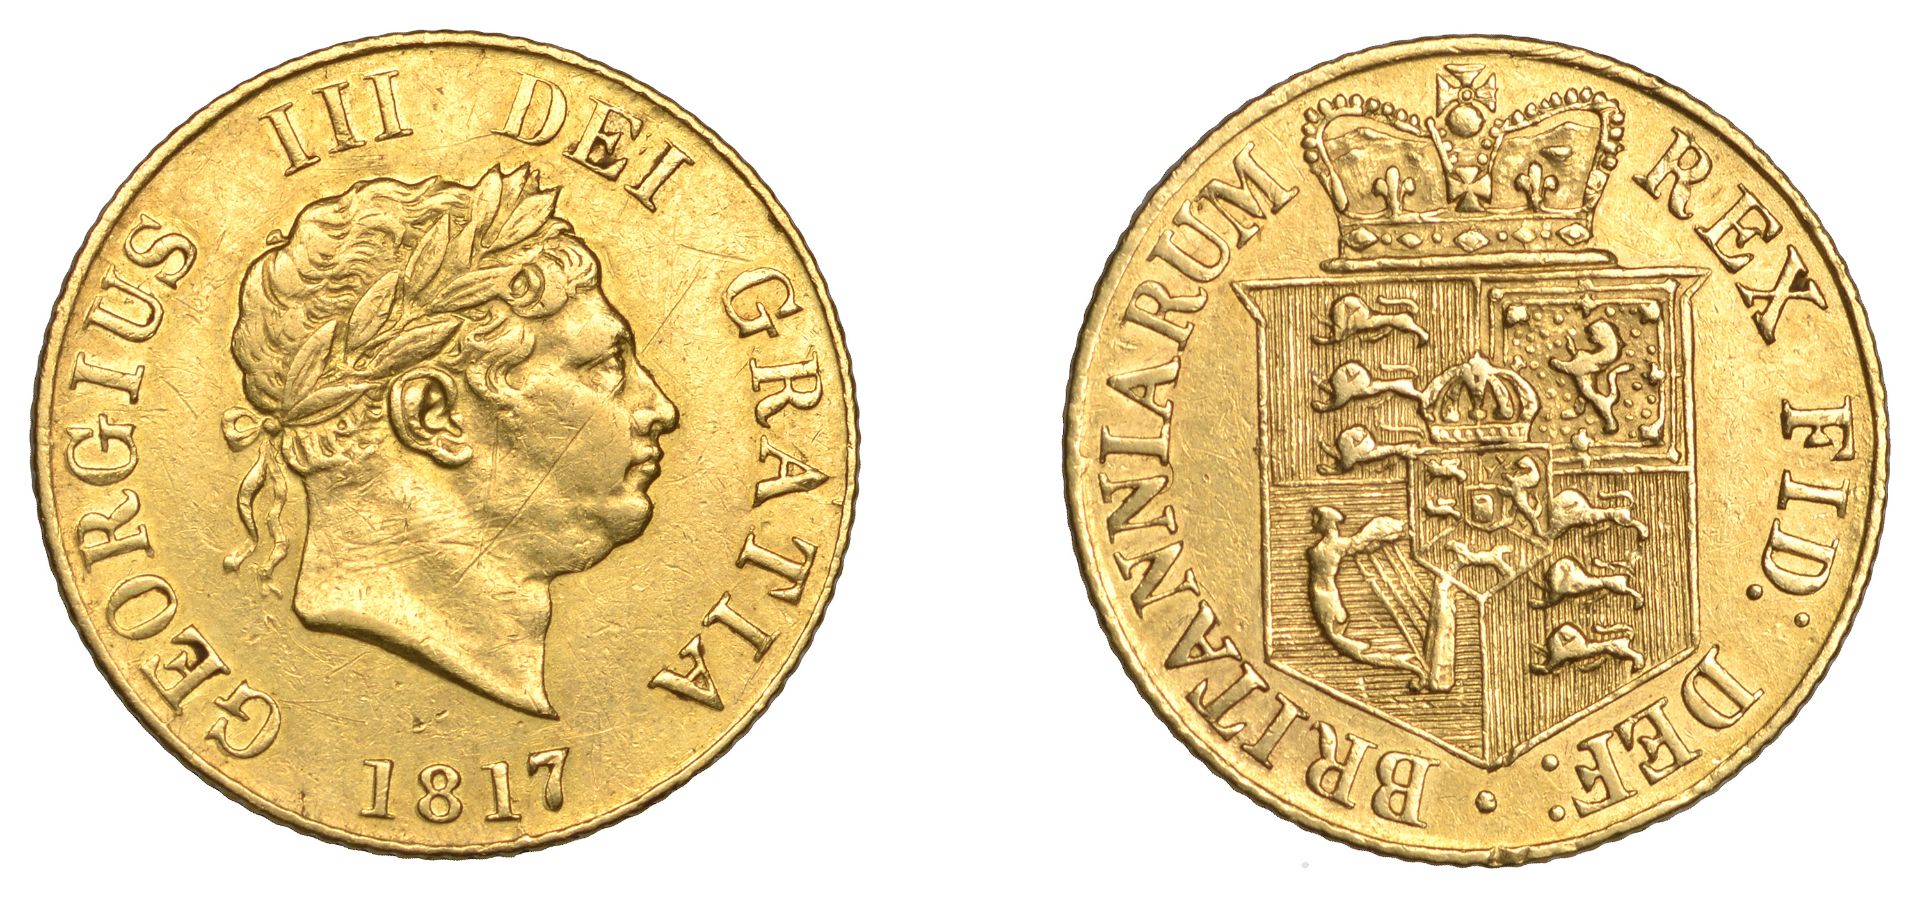 George III (1760-1820), New coinage, Half-Sovereign, 1817 (M 400; S 3786). Light scratches o...